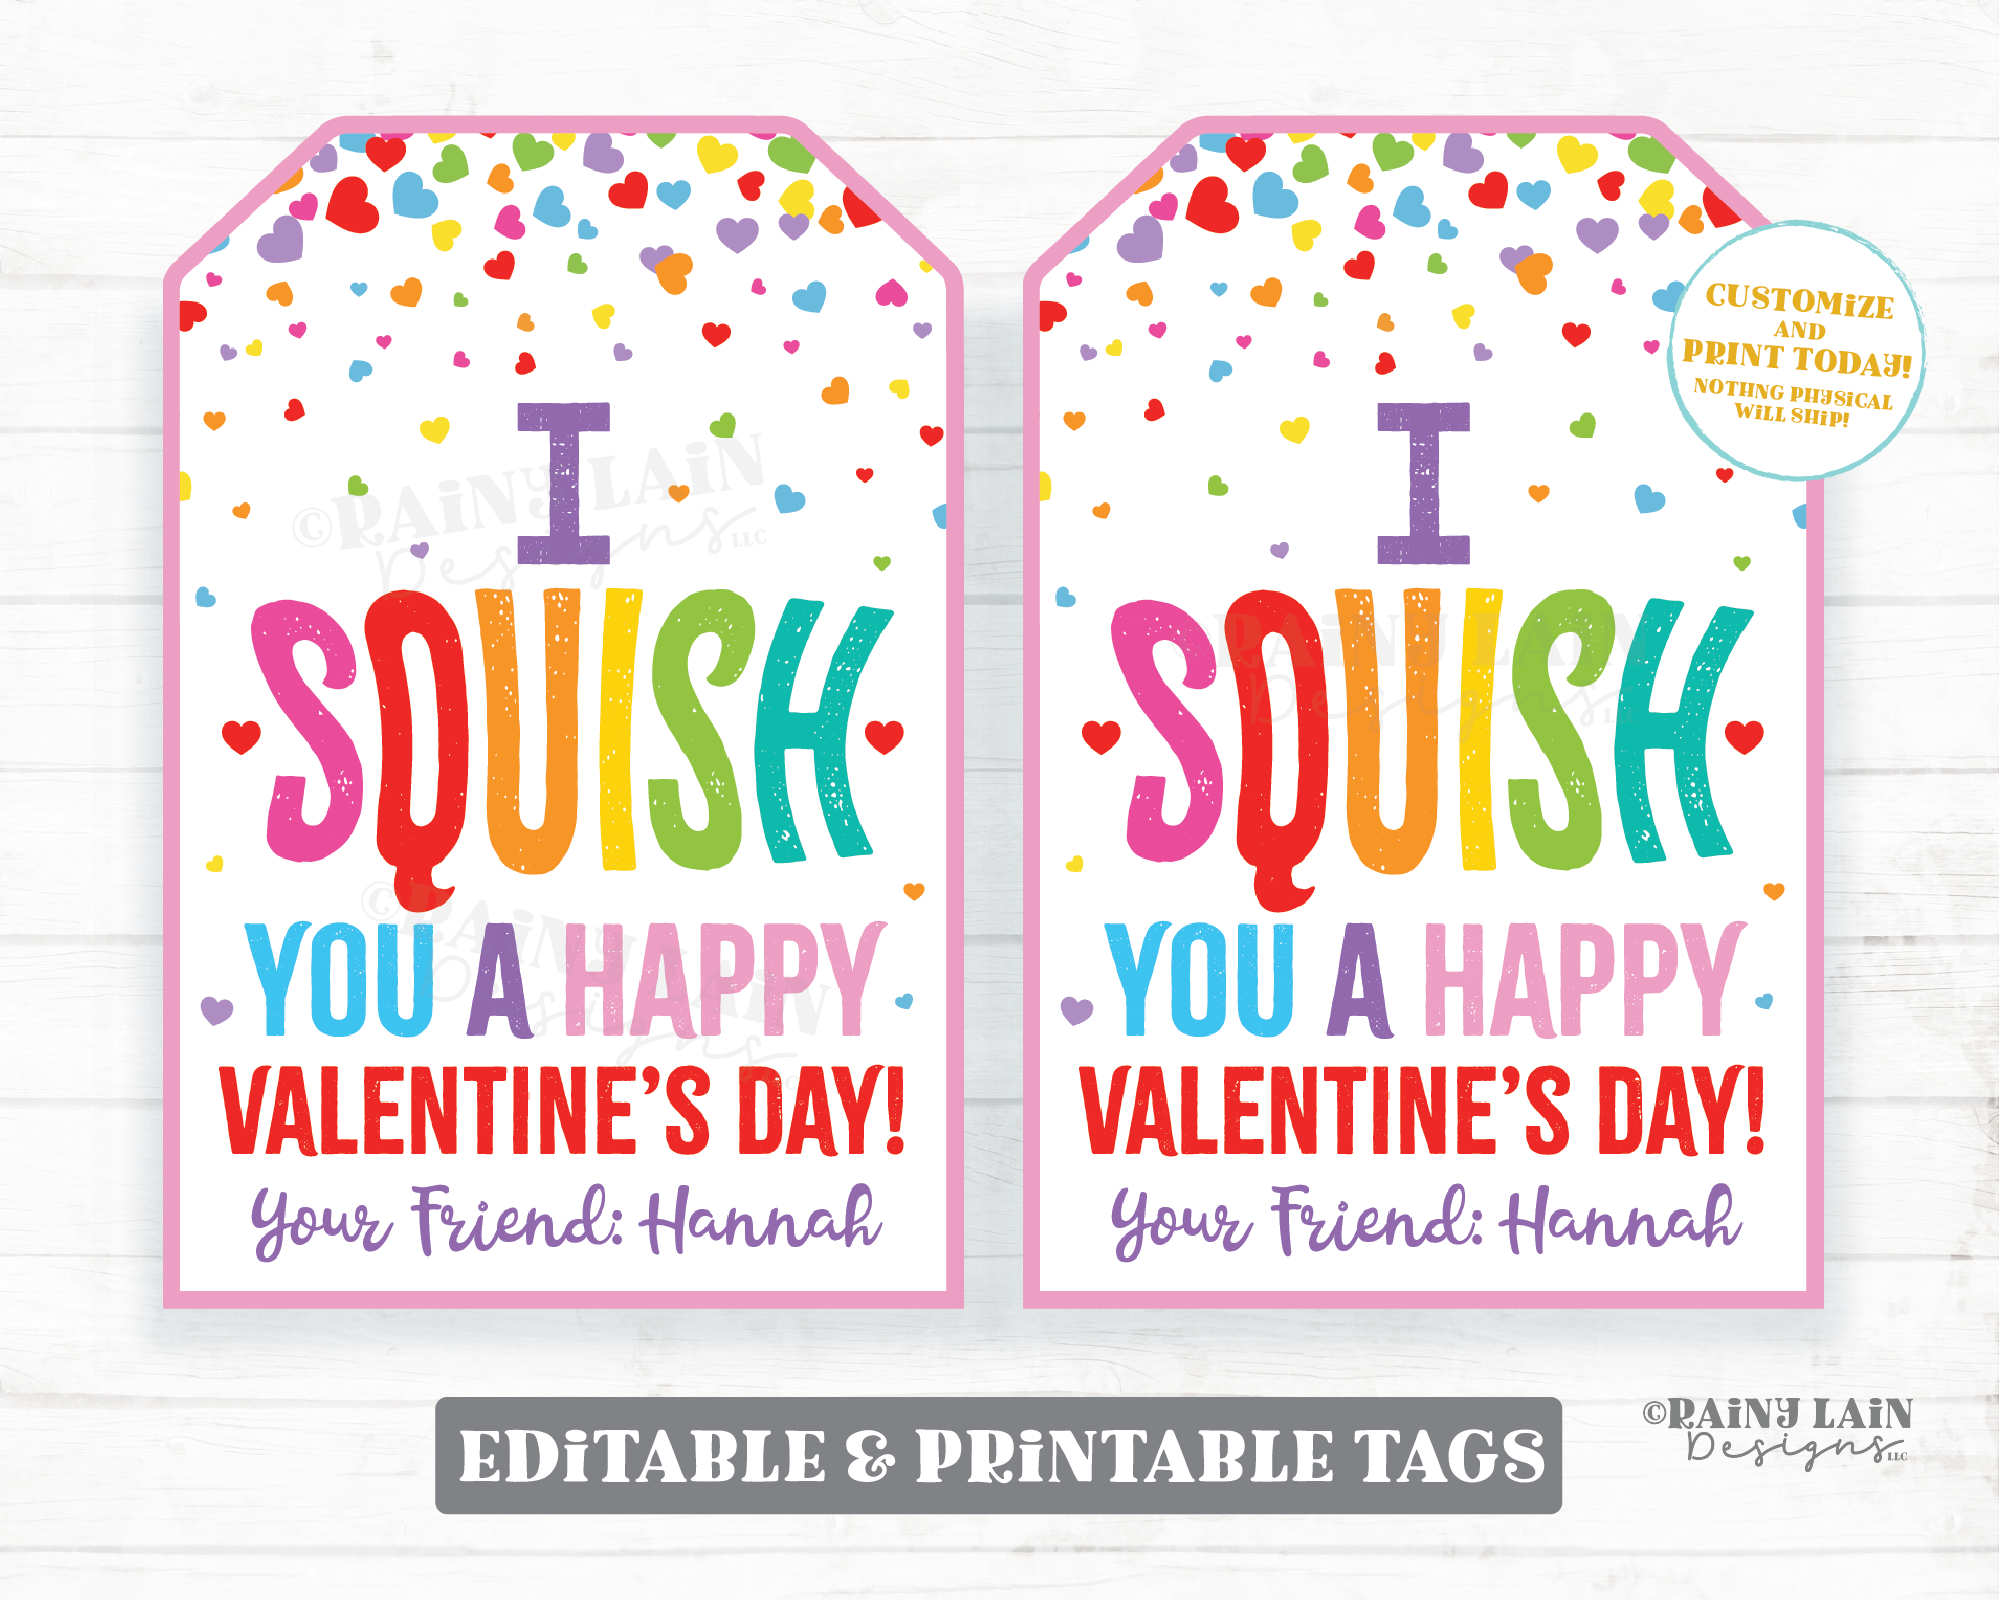 Squishies Valentine I squish you a happy Valentine's day Squishy Toy Squishee Squeeze Classroom Preschool Printable Kids Non-Candy Valentine